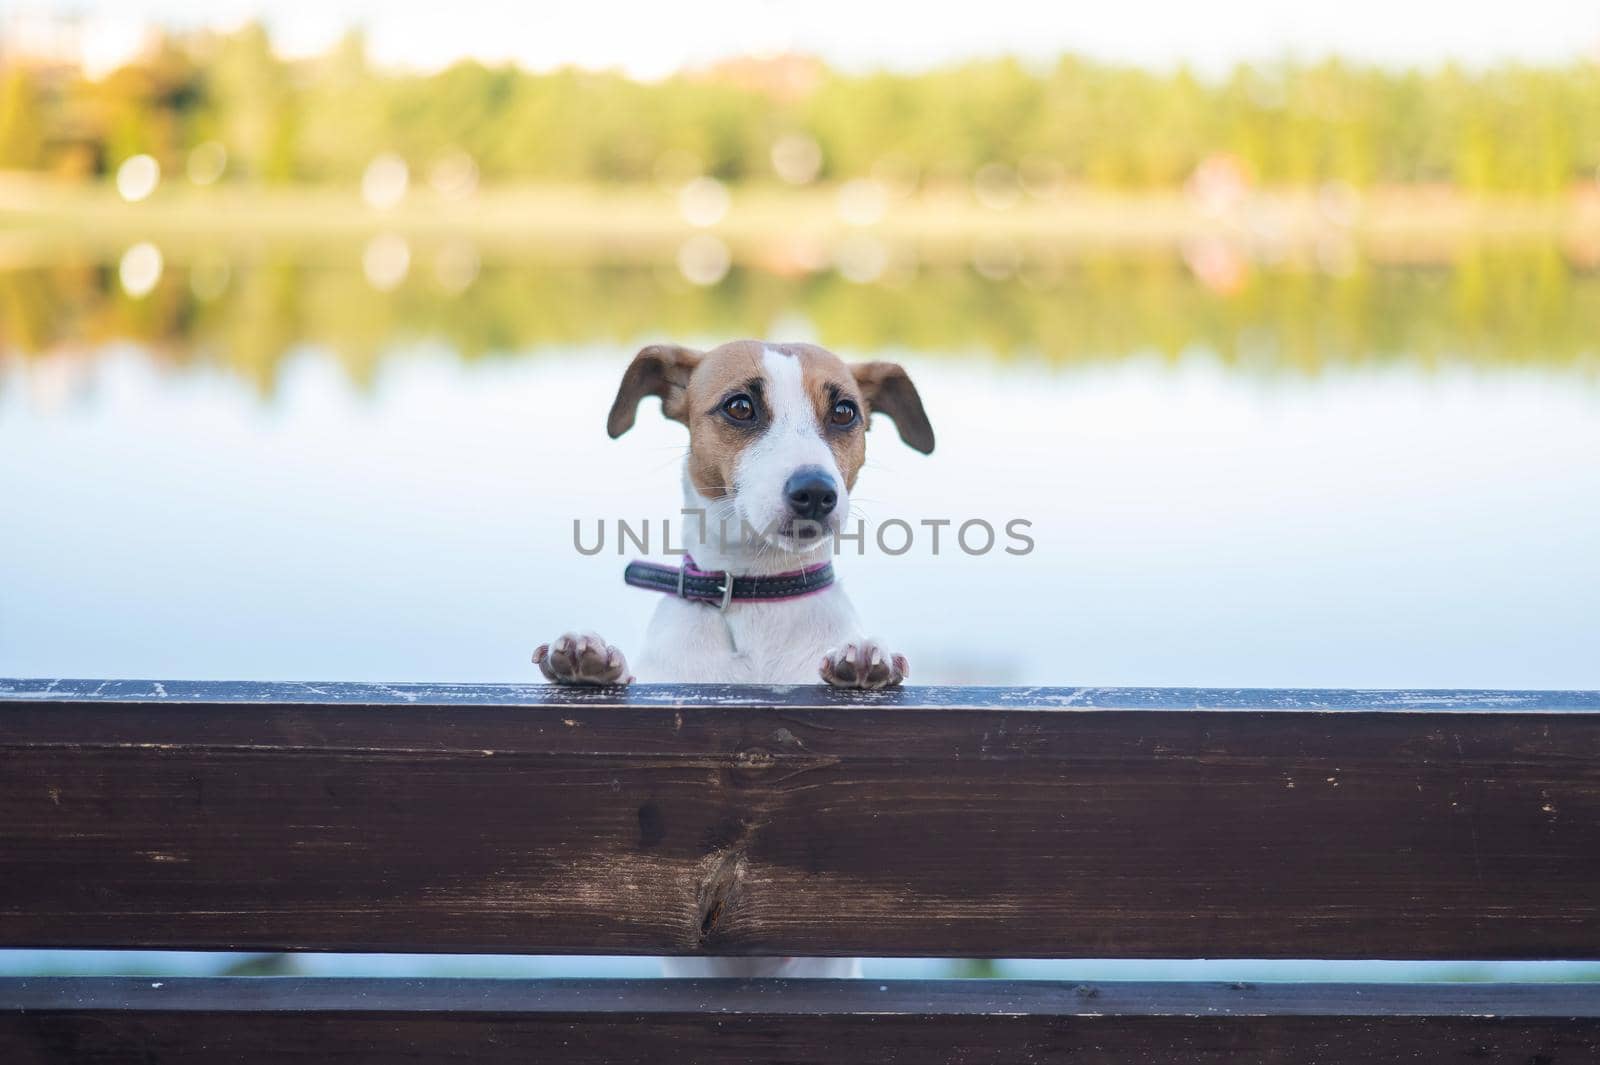 Lonely dog on a bench by the lake